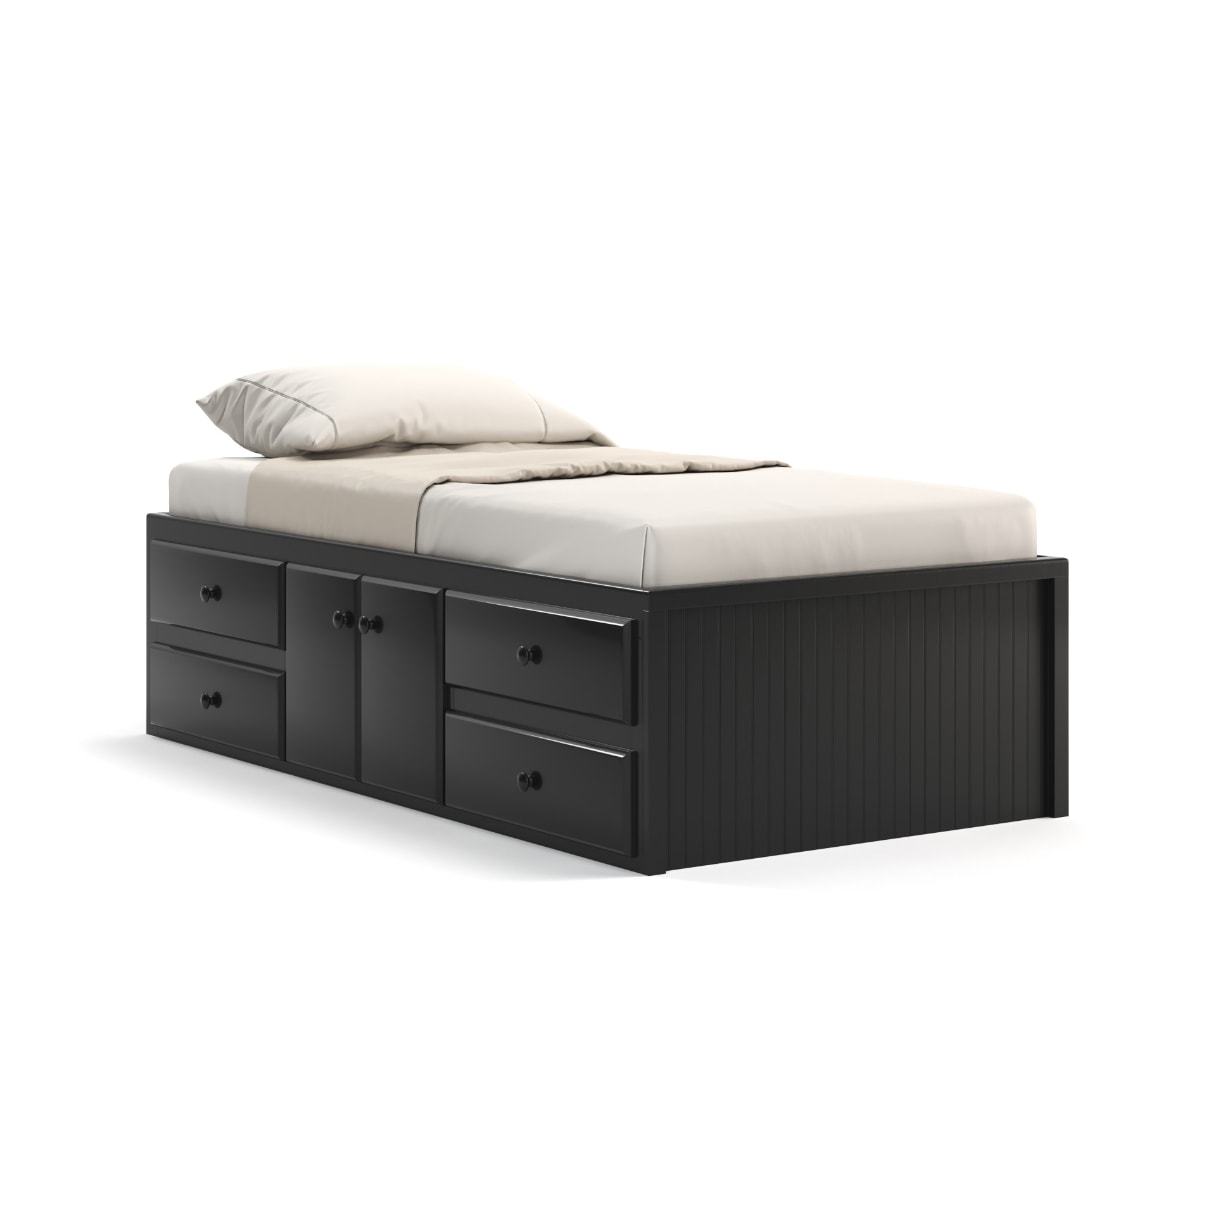 Acadia Cottage Storage Bed with 4 drawers and two doors on each side. Pictured in black with bead board end.